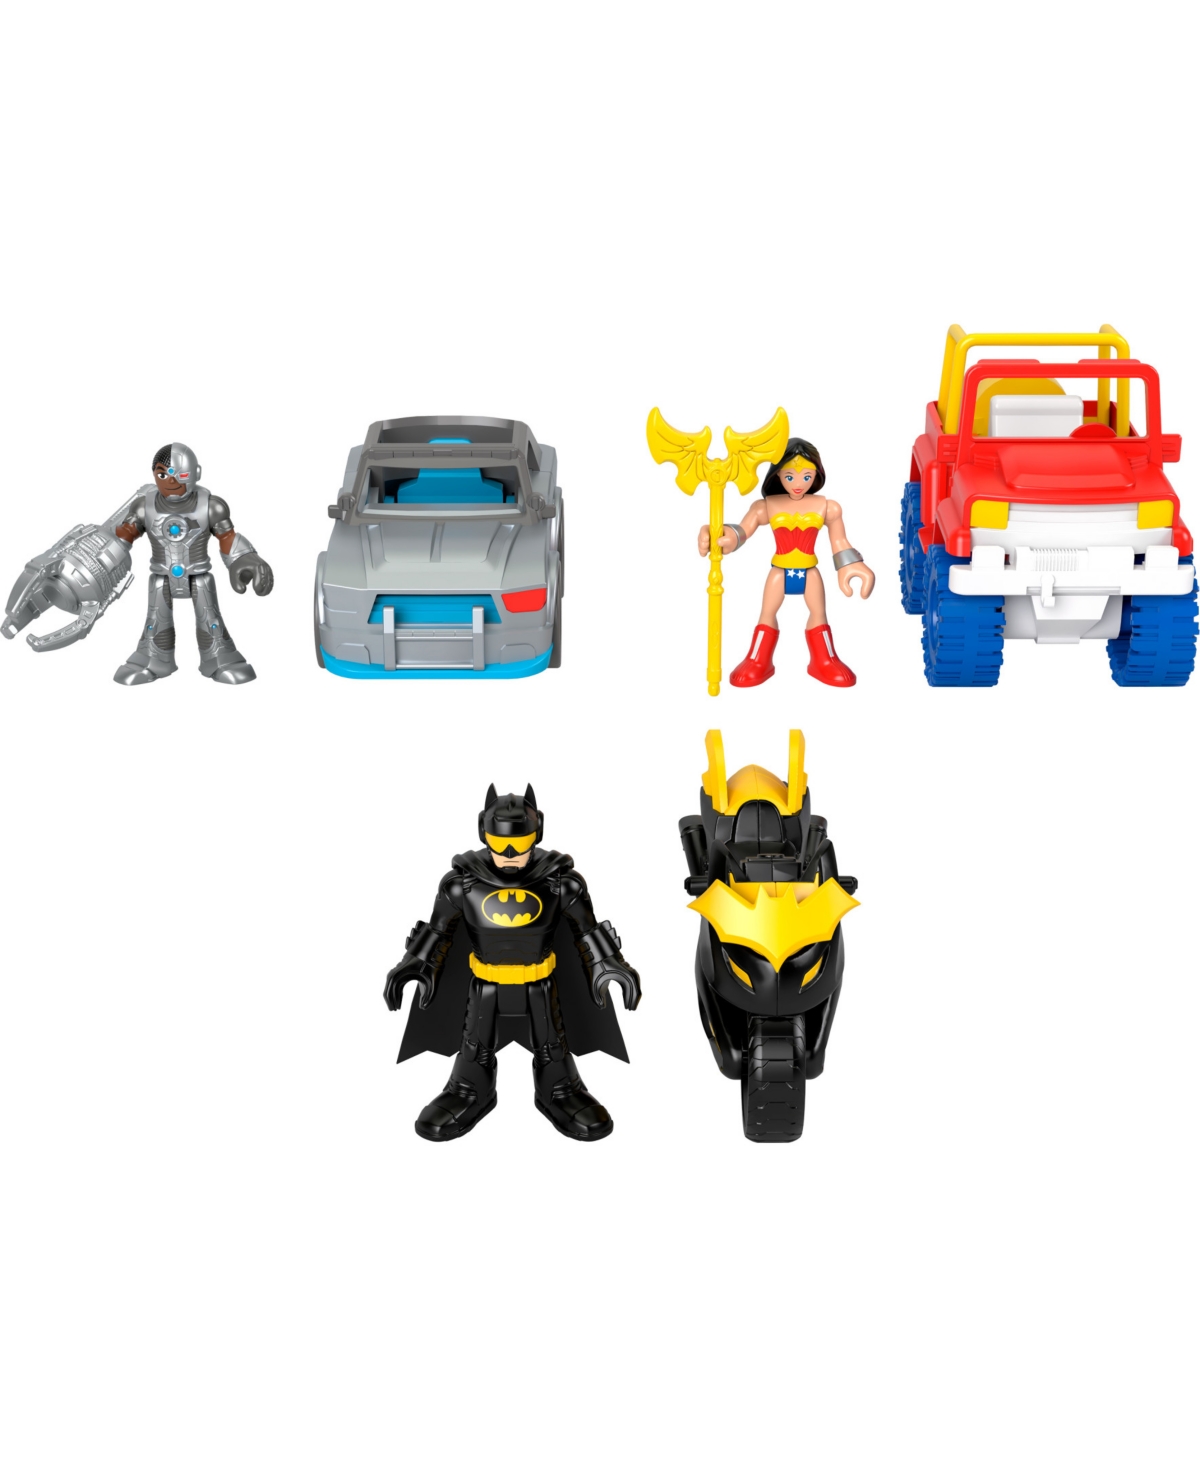 Imaginext Dc Super Friends Batman Gift Set With Wonder Woman And Cyborg Preschool Toy, 9 Piece In Multi-color